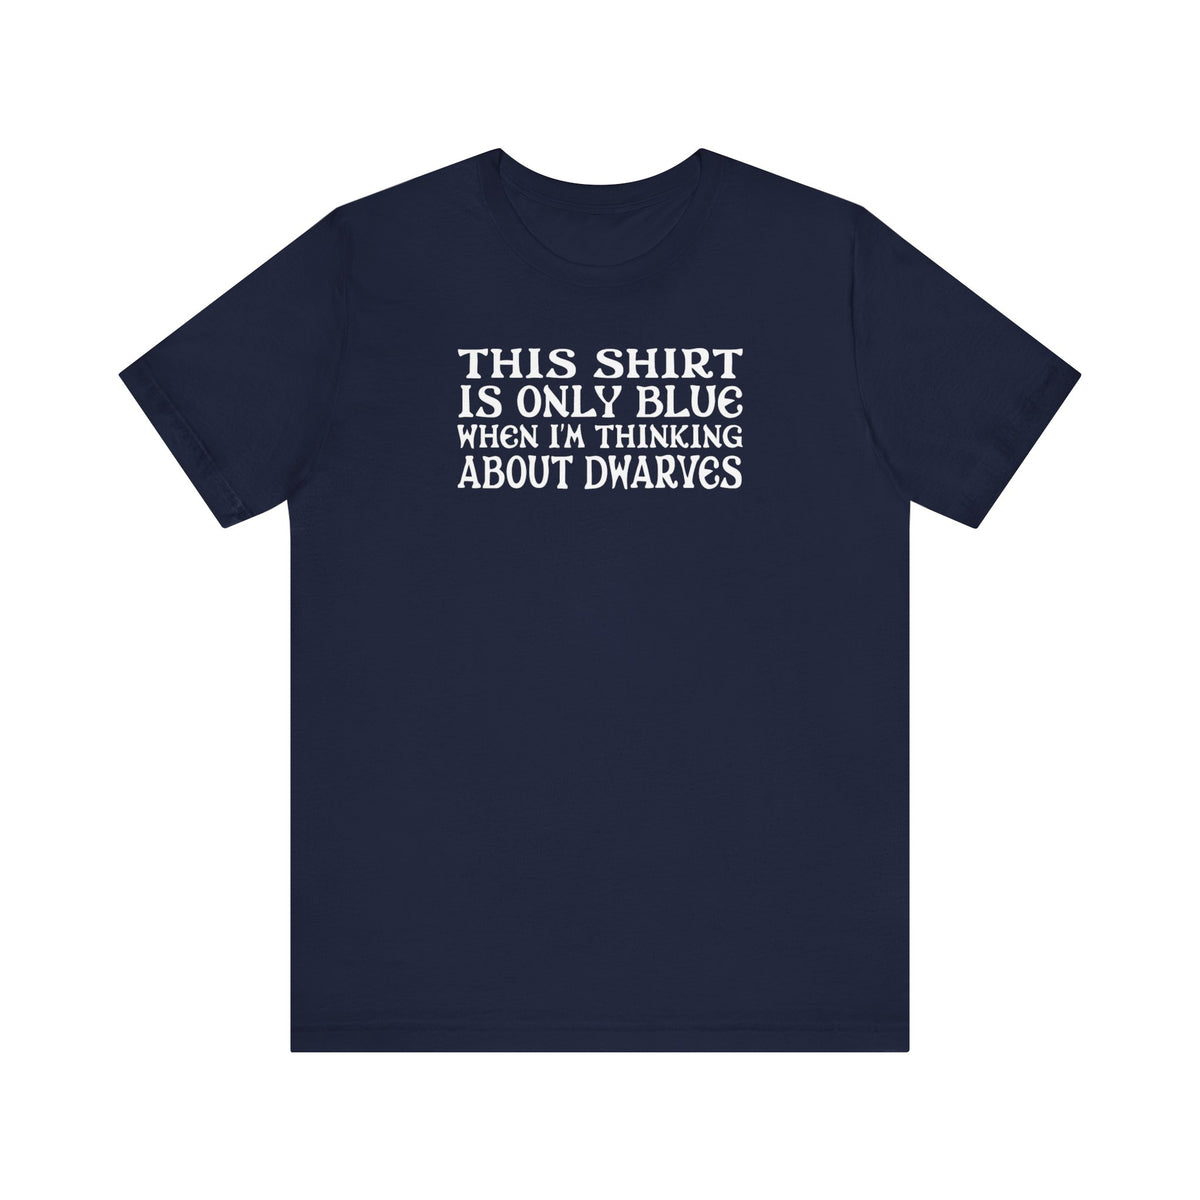 This Shirt Is Only Blue When I'm Thinking About Dwarves  - Men's T-Shirt